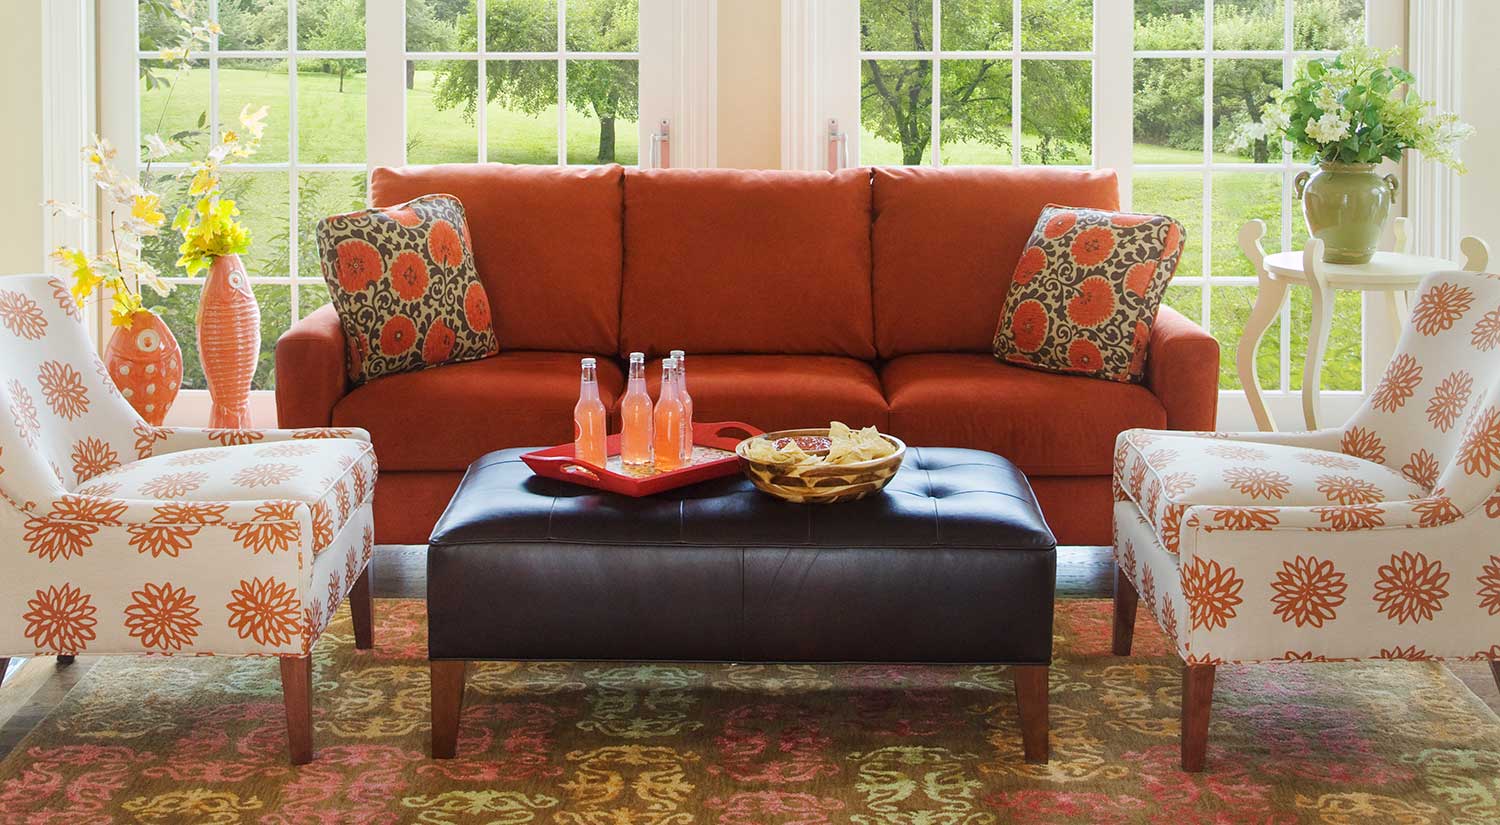 living room with orange couch and matching decor